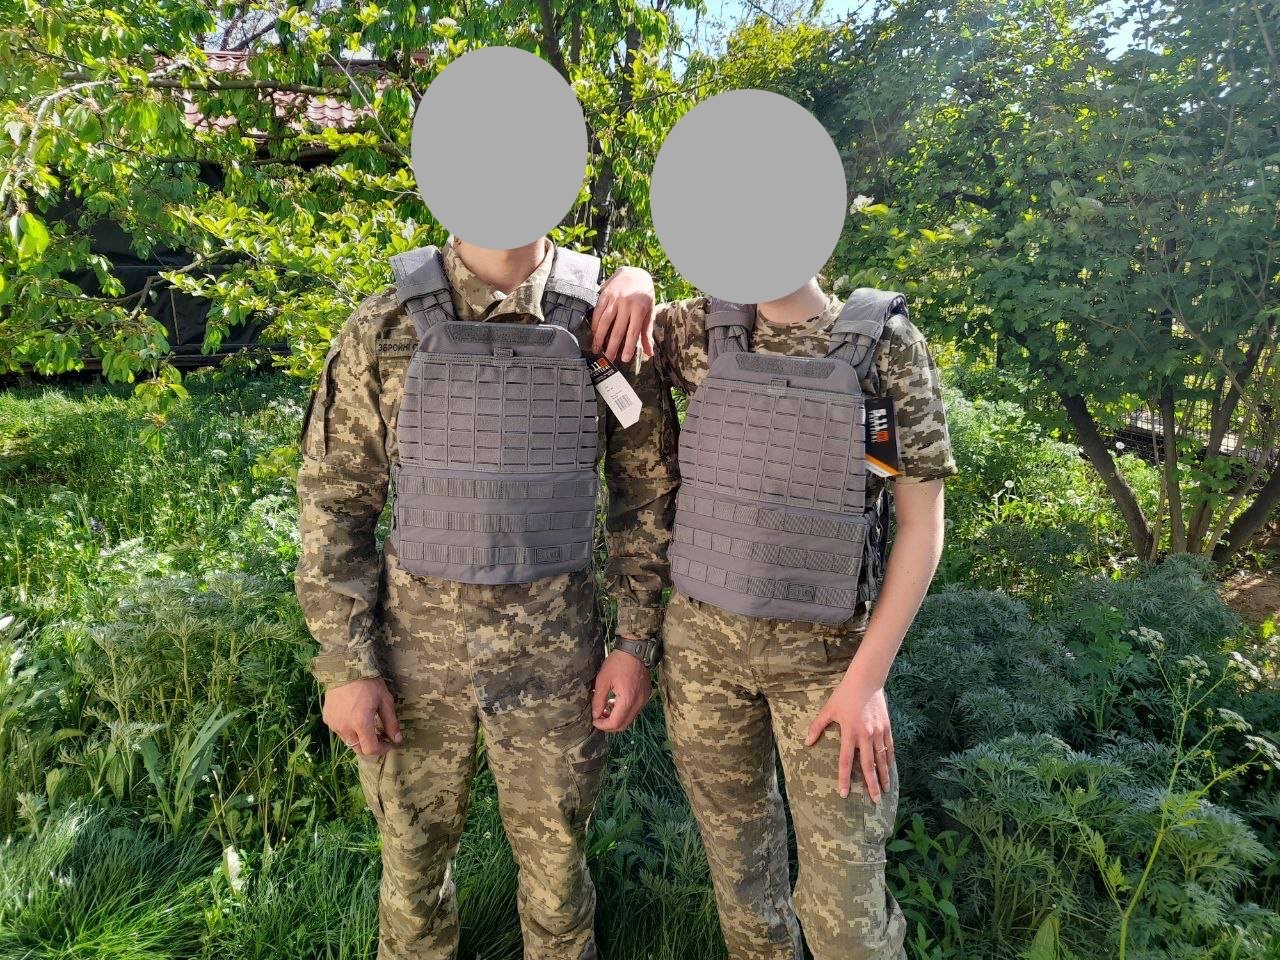 Ukrainian soldiers who received protective 5.11 plate carriers